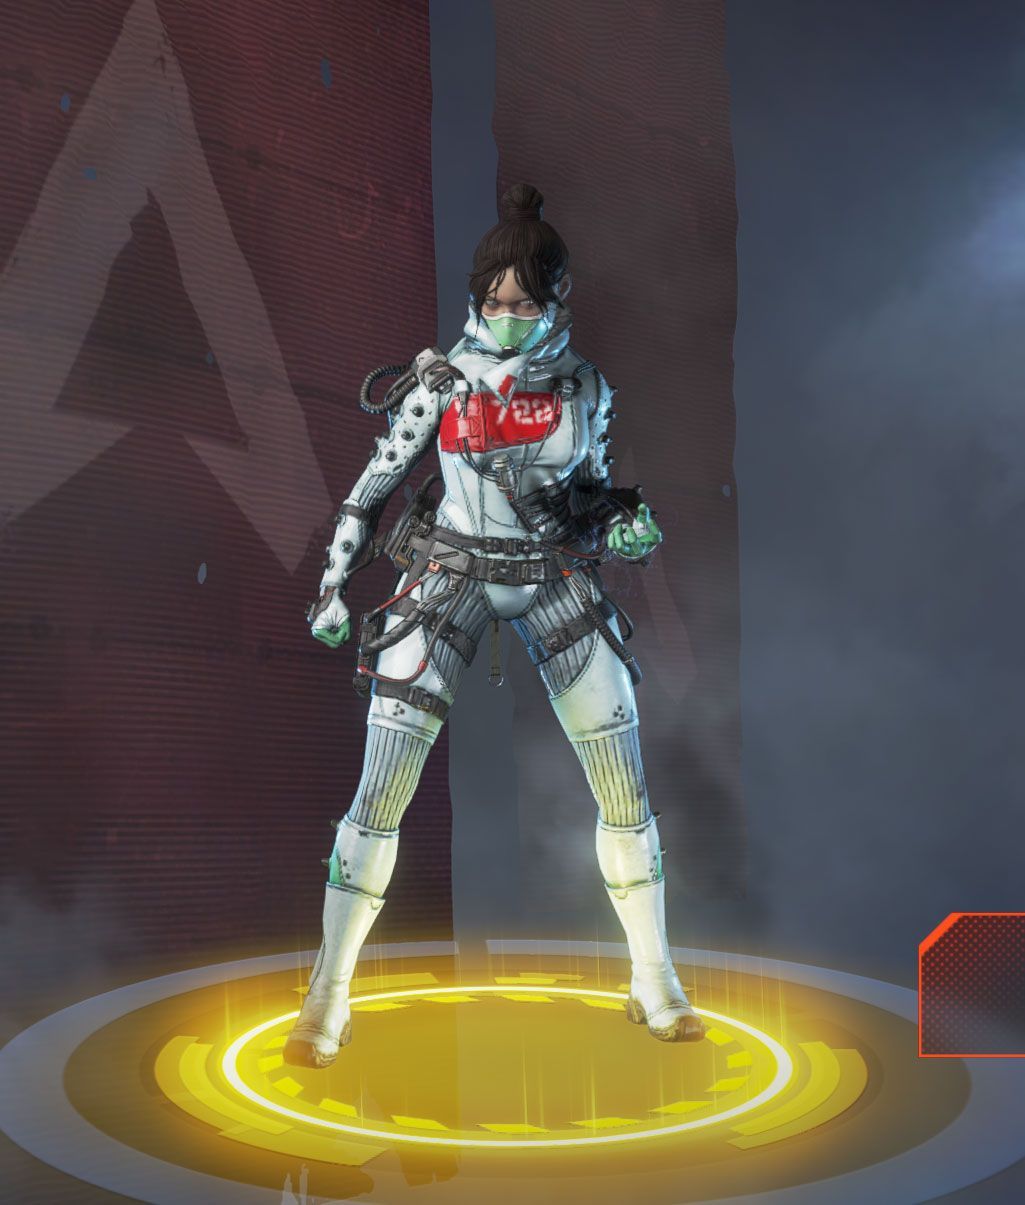 The Quarantine 722 skin for Wraith in Apex Legends! checkout